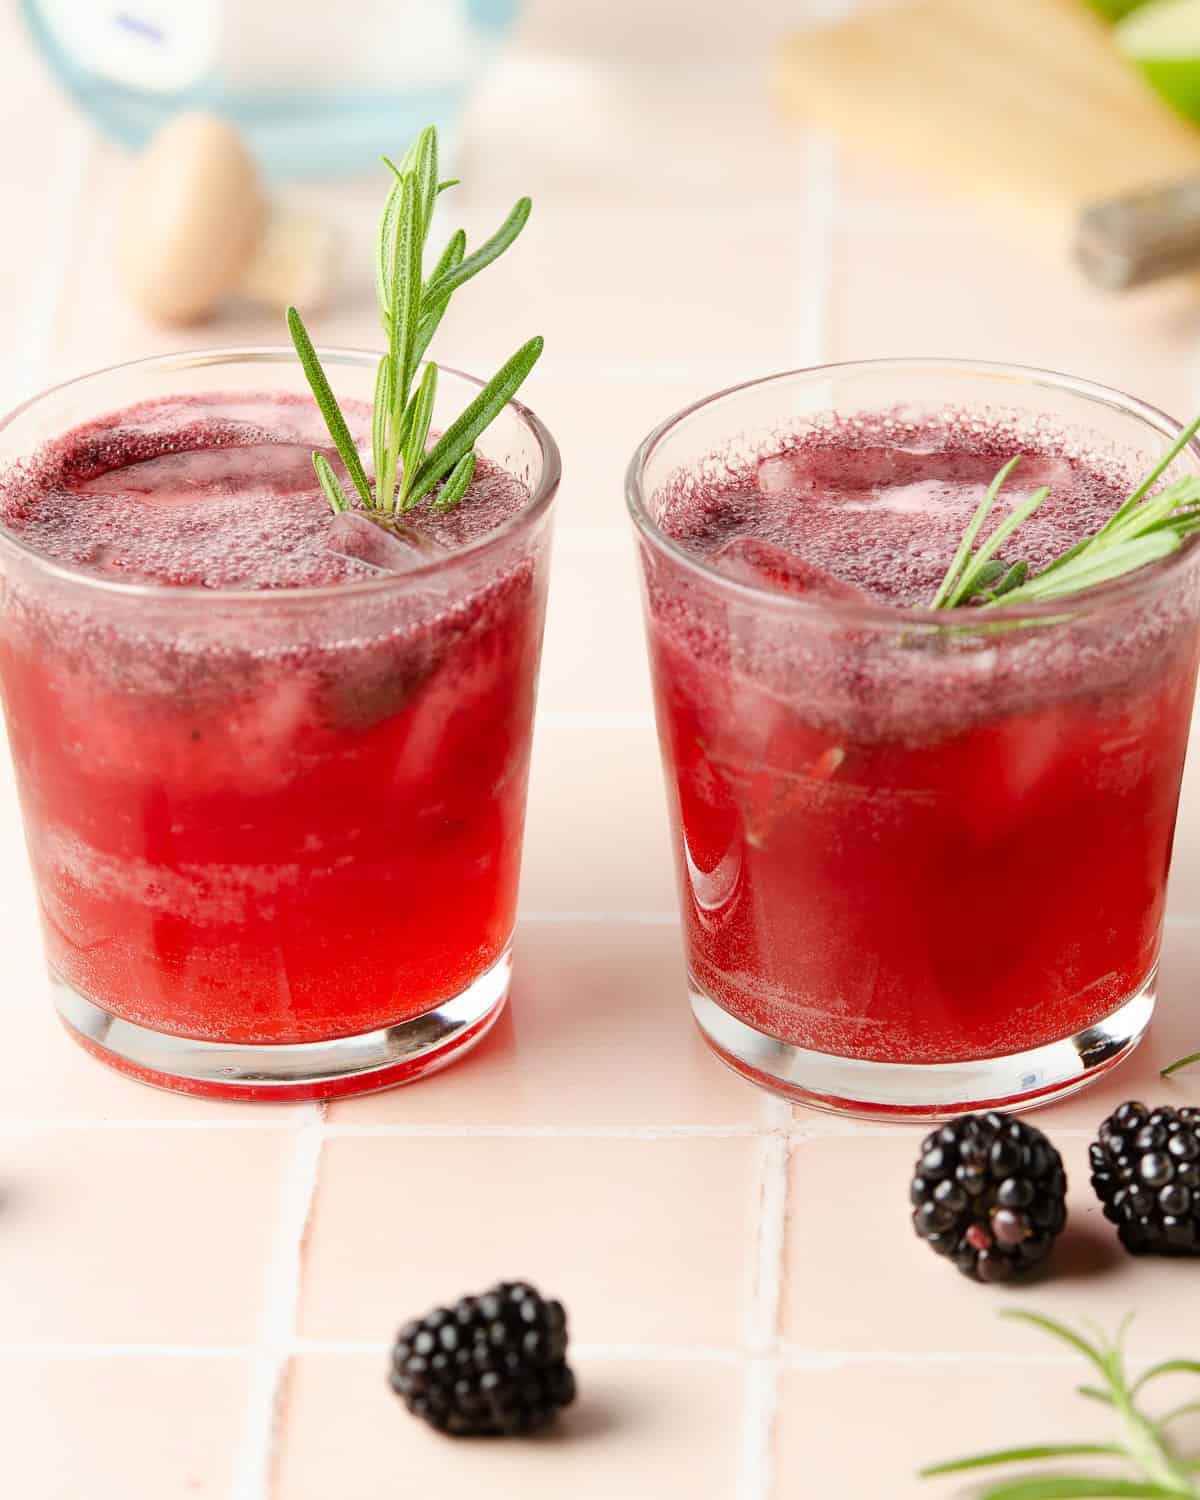 wo blackberry rosemary margaritas topped with rosemary sprigs and sparkling on top from the ginger beer